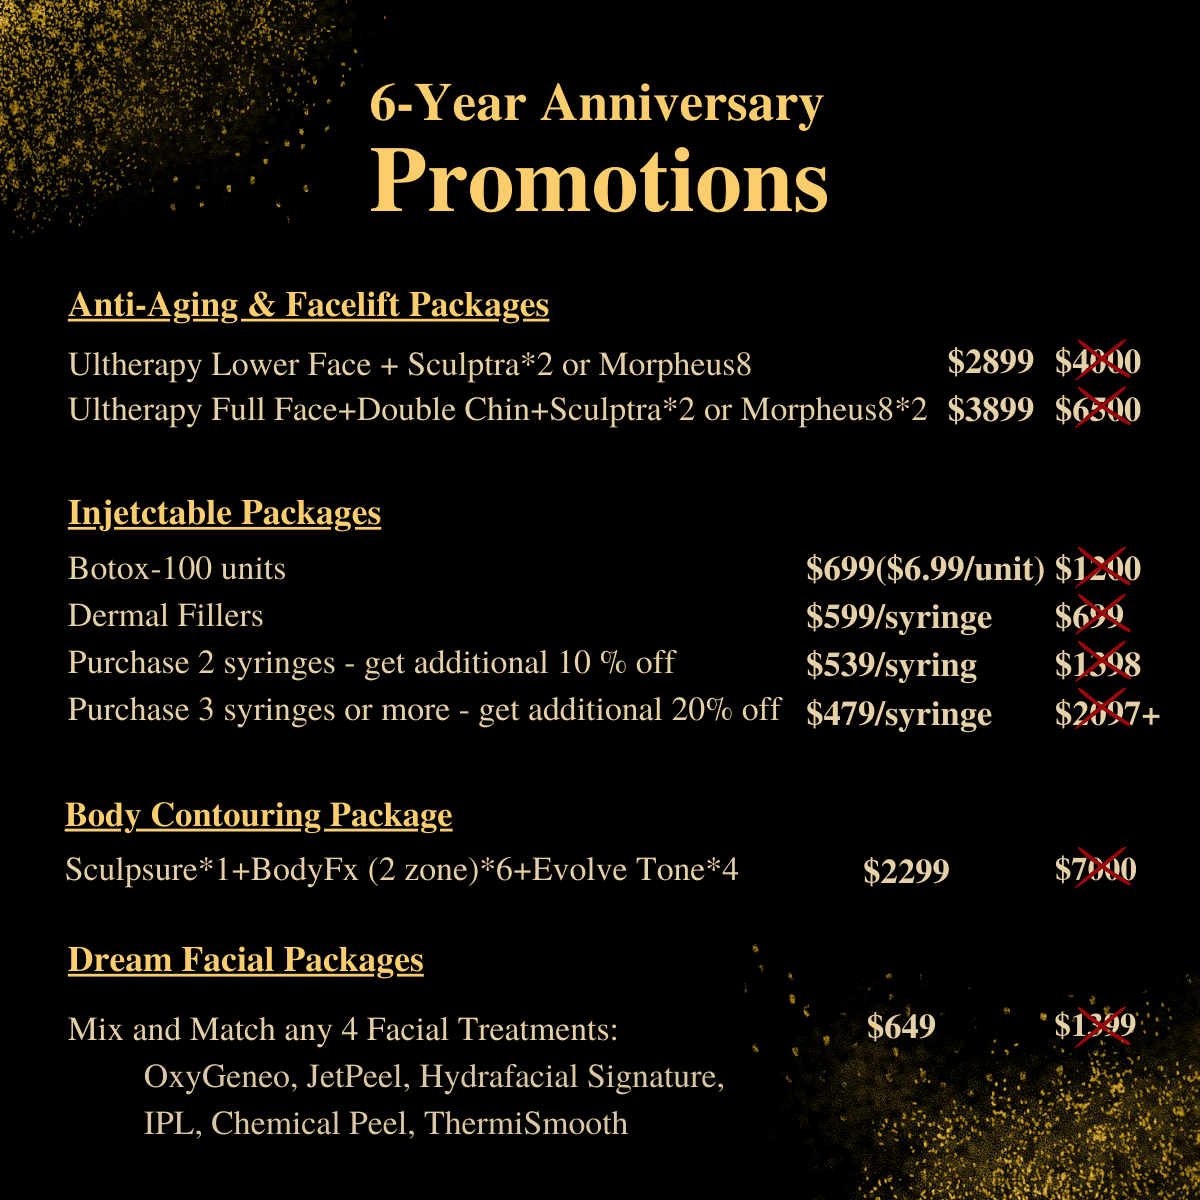 6-year anniversary promotions